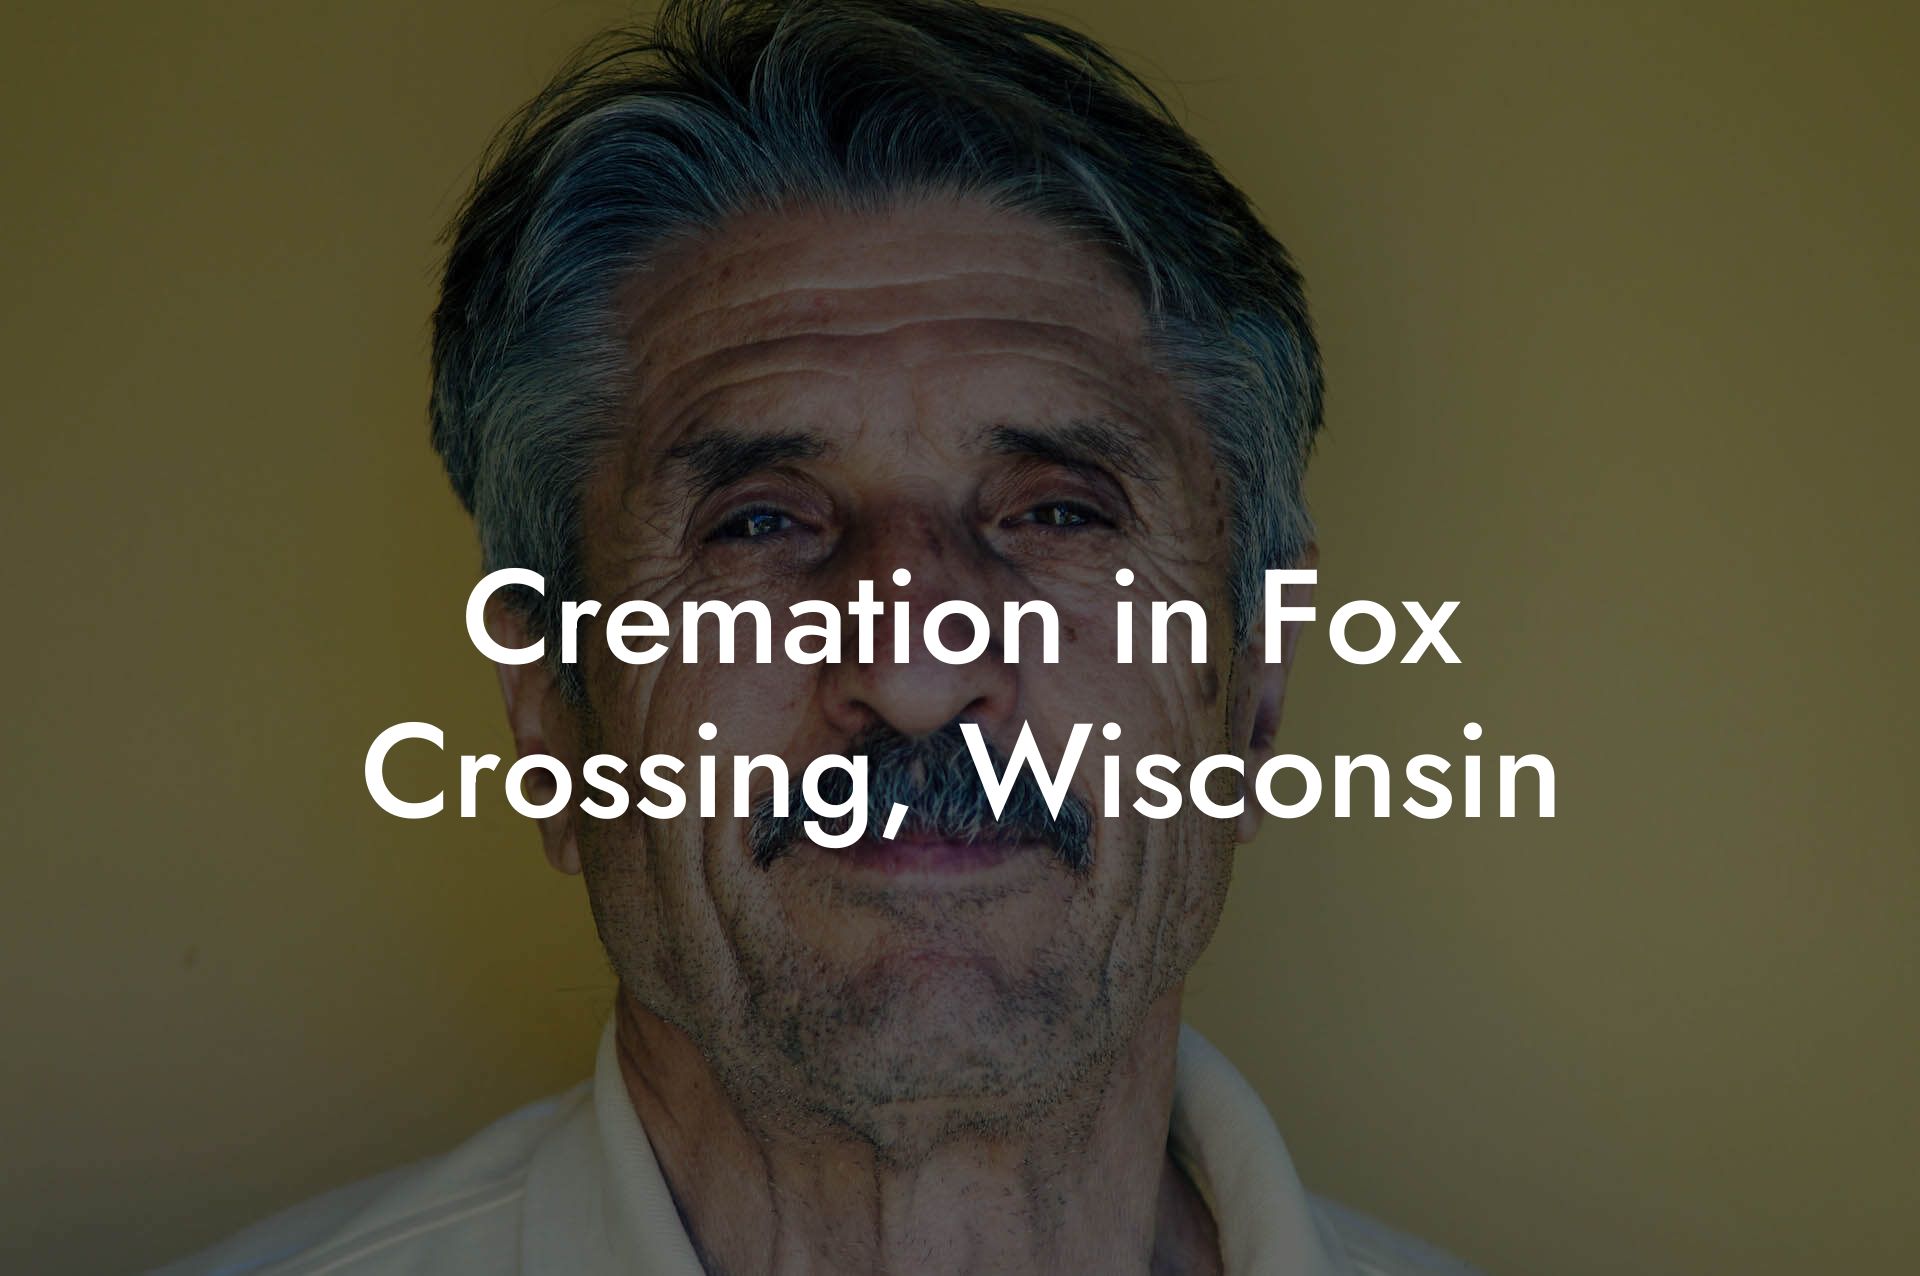 Cremation in Fox Crossing, Wisconsin